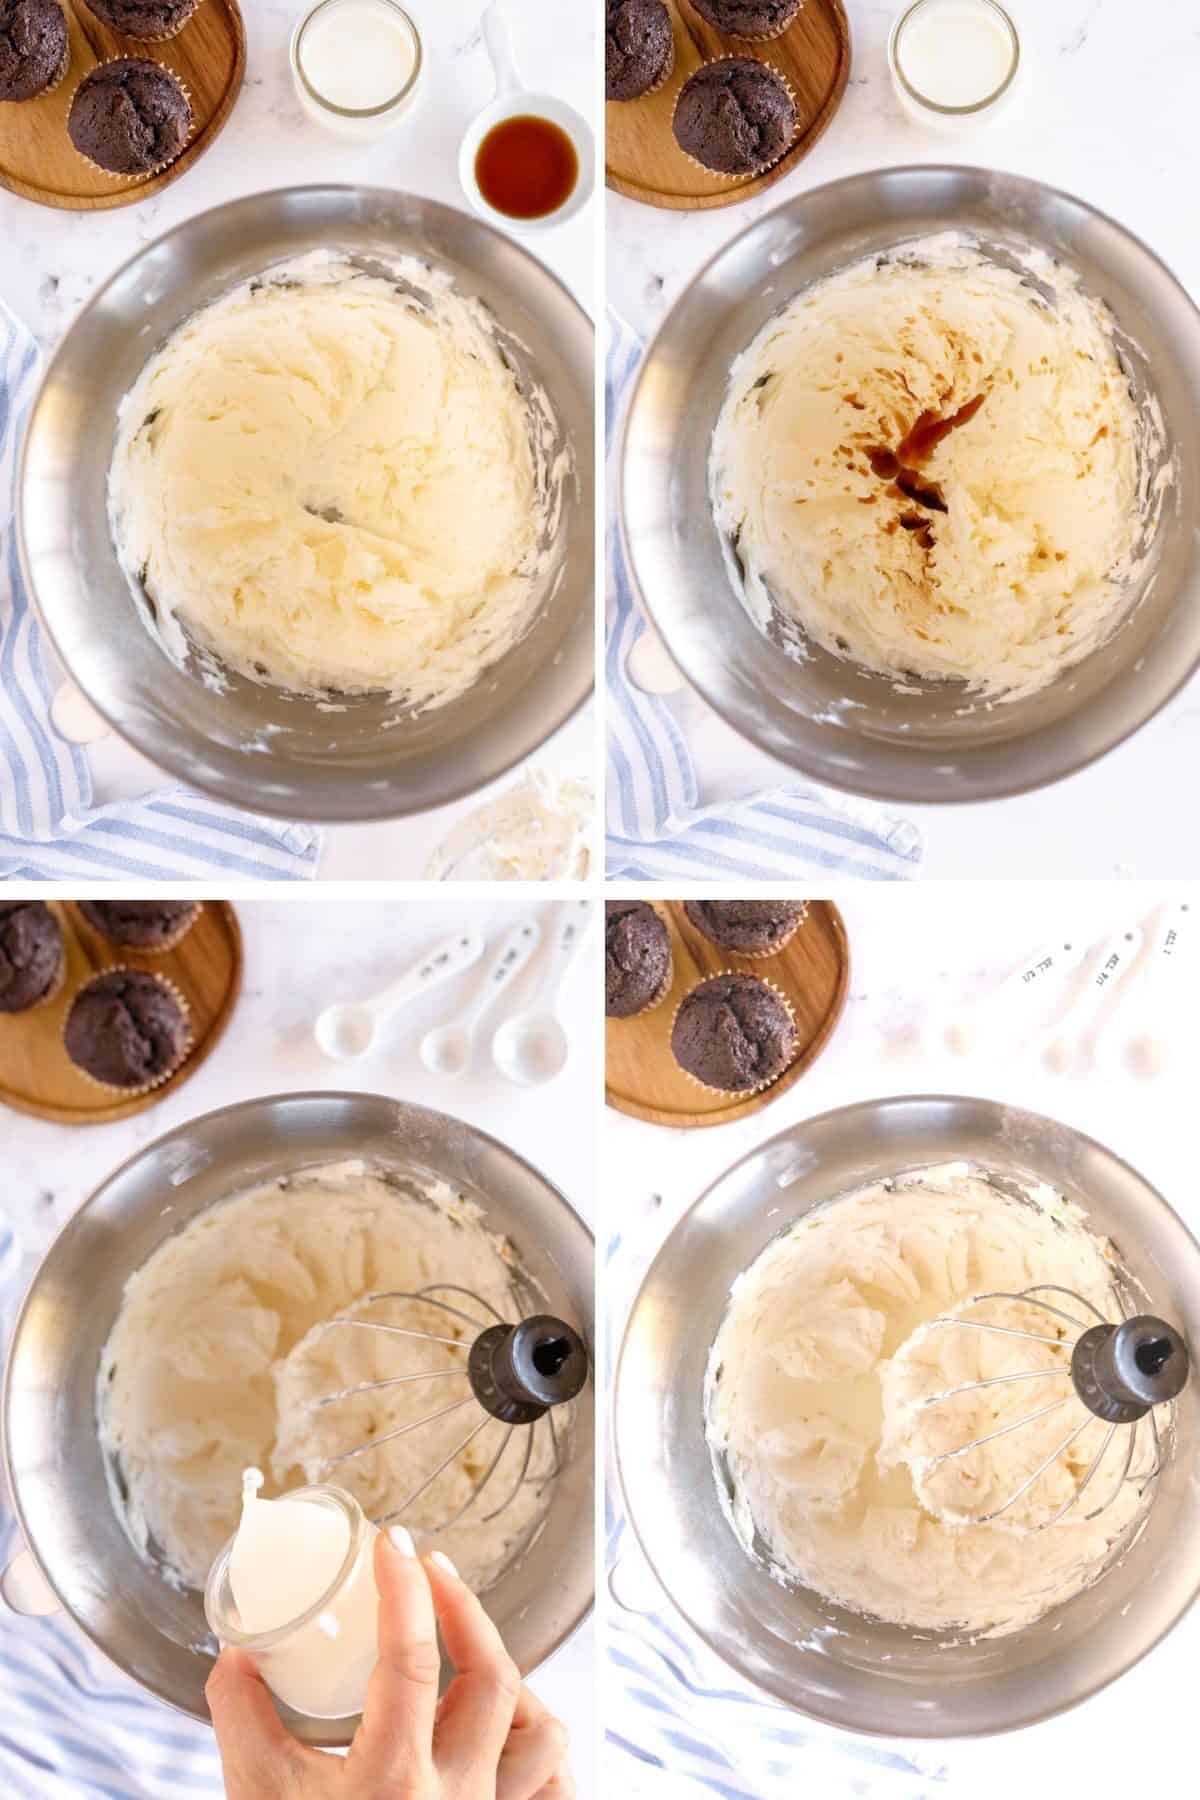 How to make Vanilla Frosting step by step